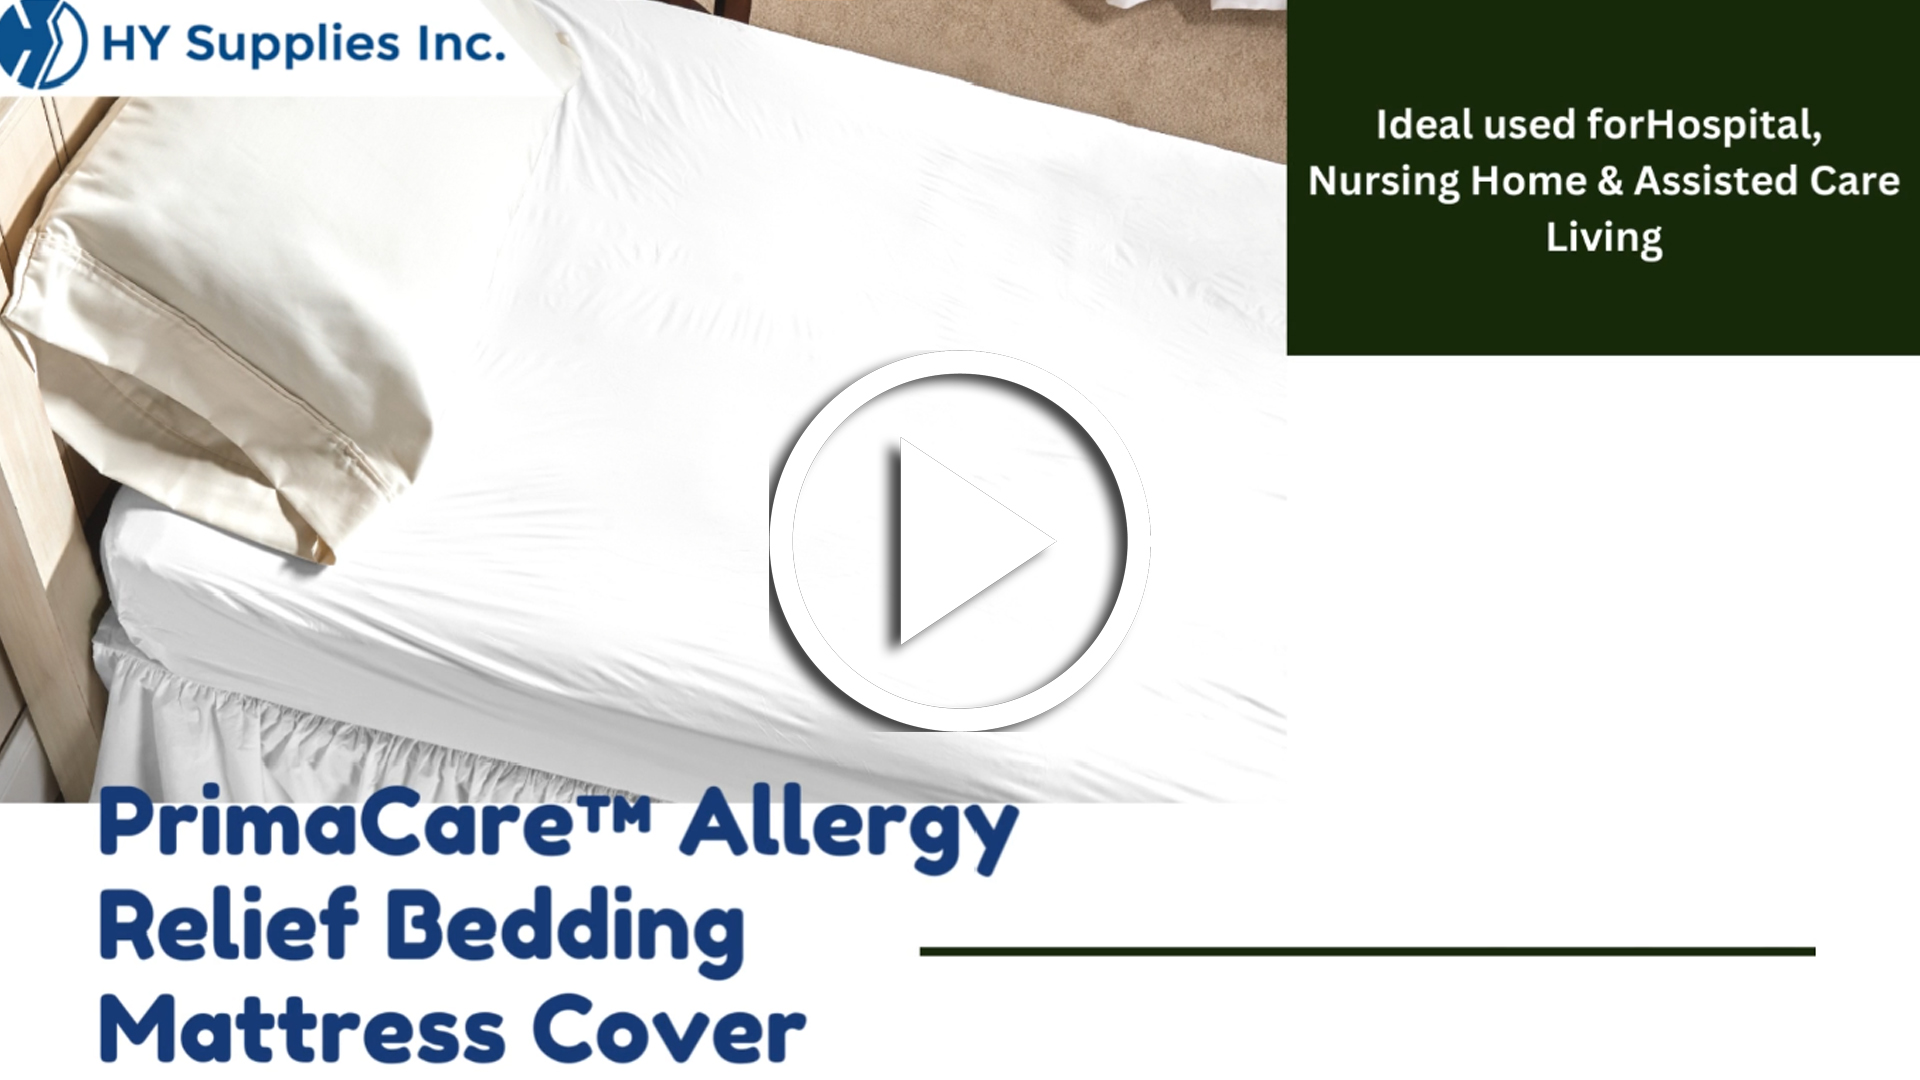 PrimaCare™ Allergy Relief Bedding – Mattress Cover